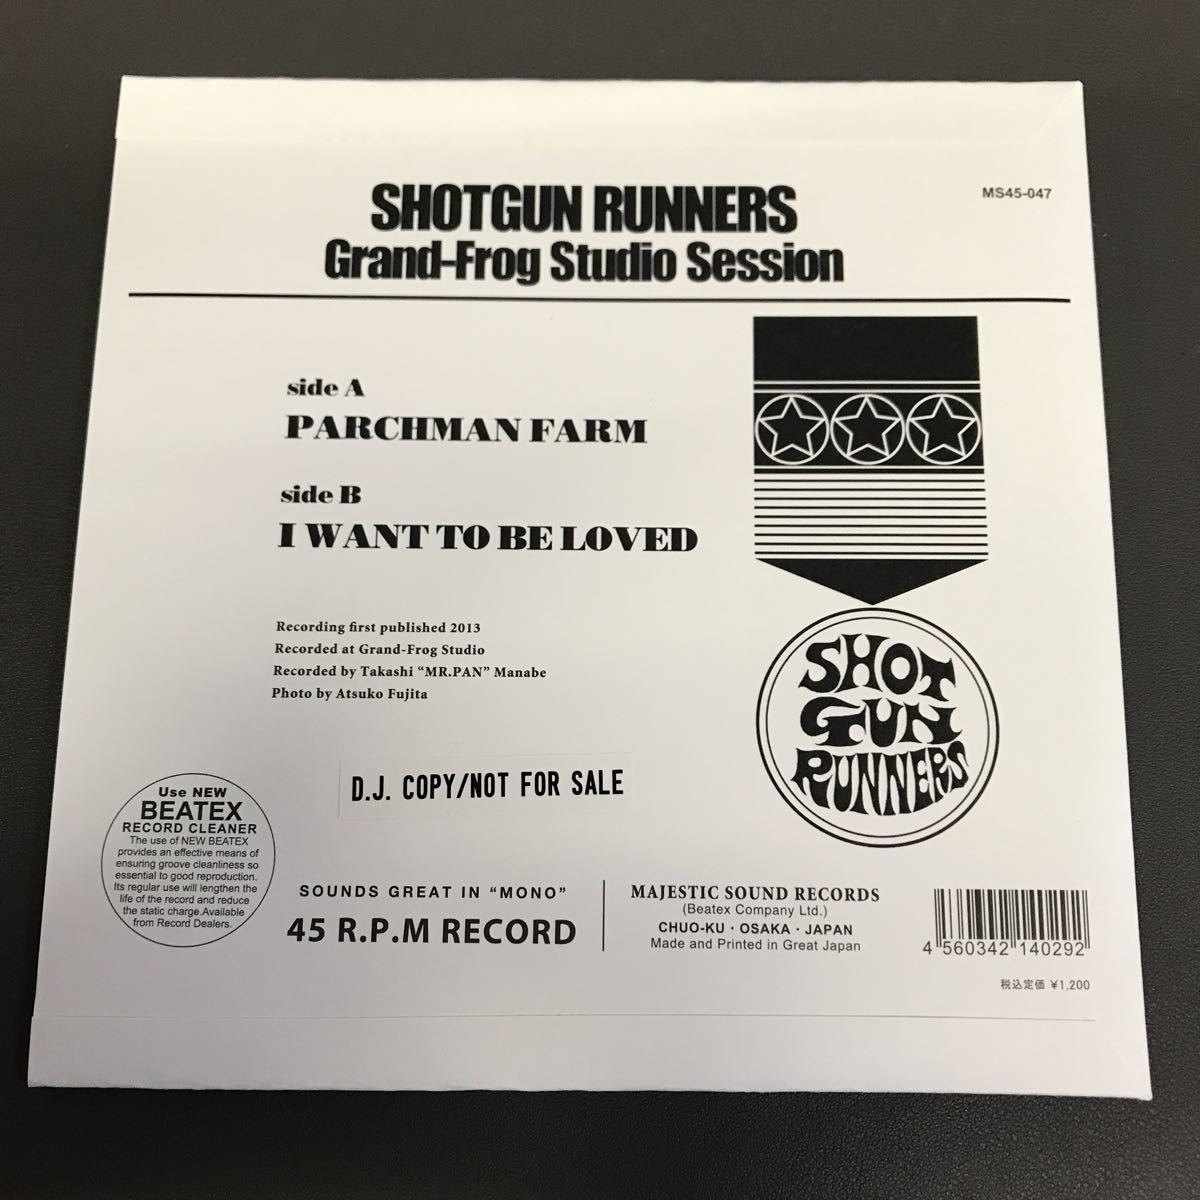 EP-007 SHOTGUN RUNNERS GRAND-FROG STUDIO SESSION PARCHMAN FARM I WANT TO BE LOVED MR.PANプロデュース作品 THE NEATBEATS_画像2